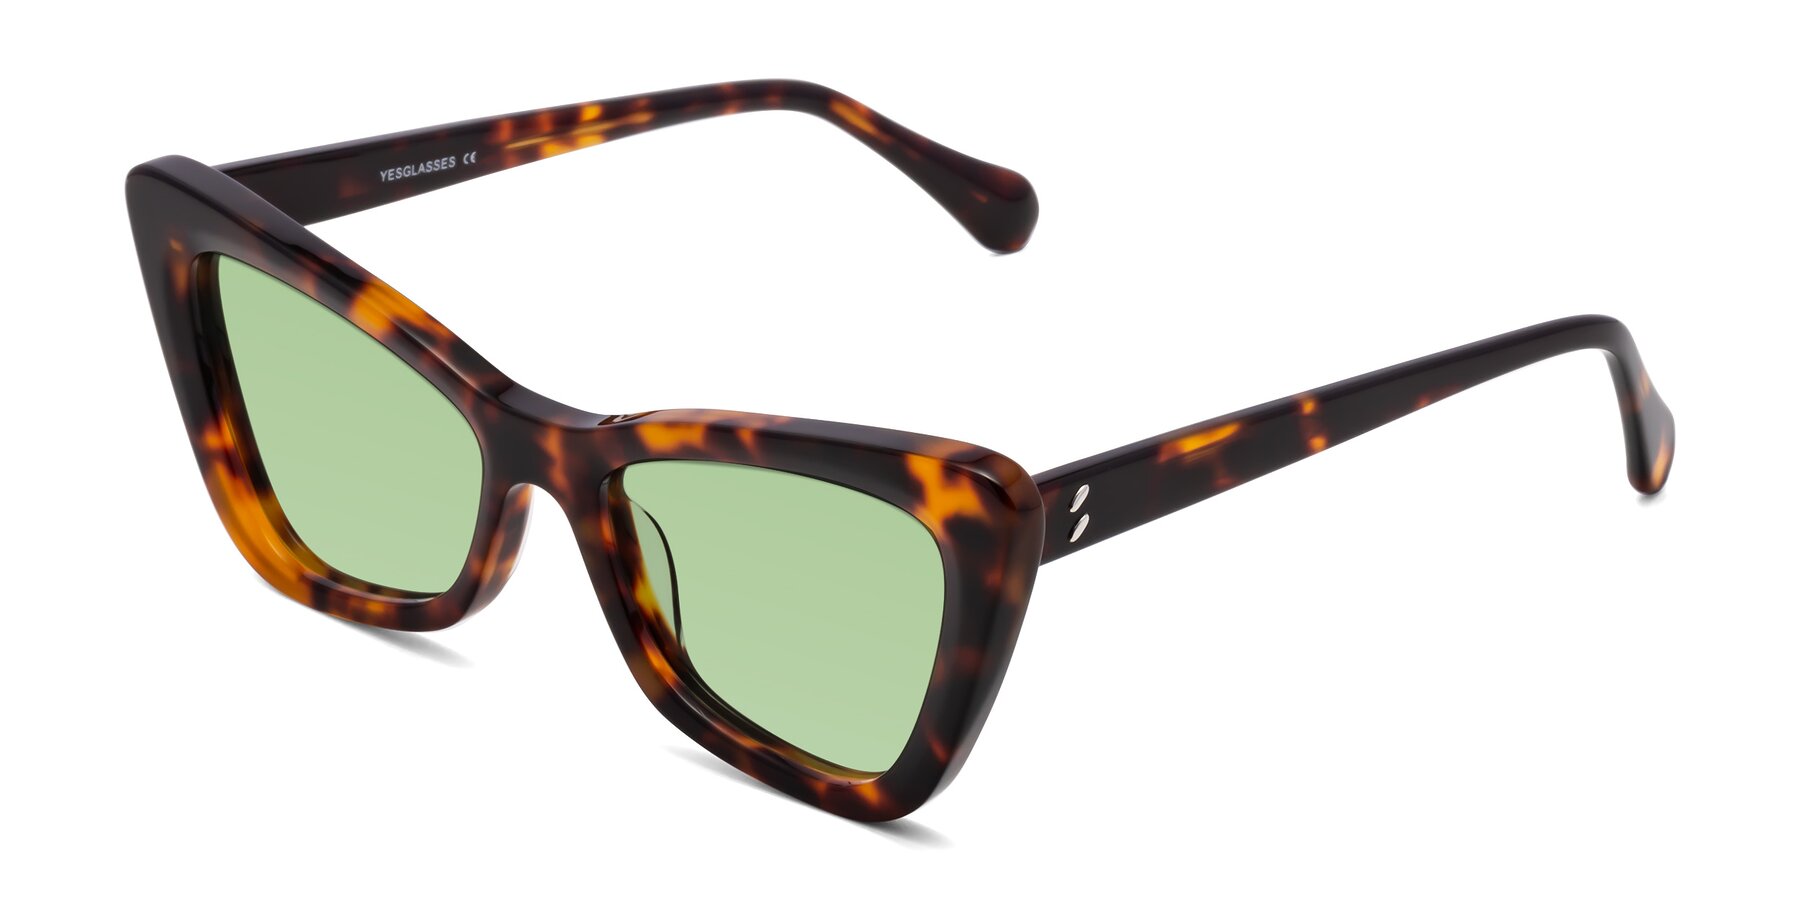 Angle of Rua in Tortoise with Medium Green Tinted Lenses